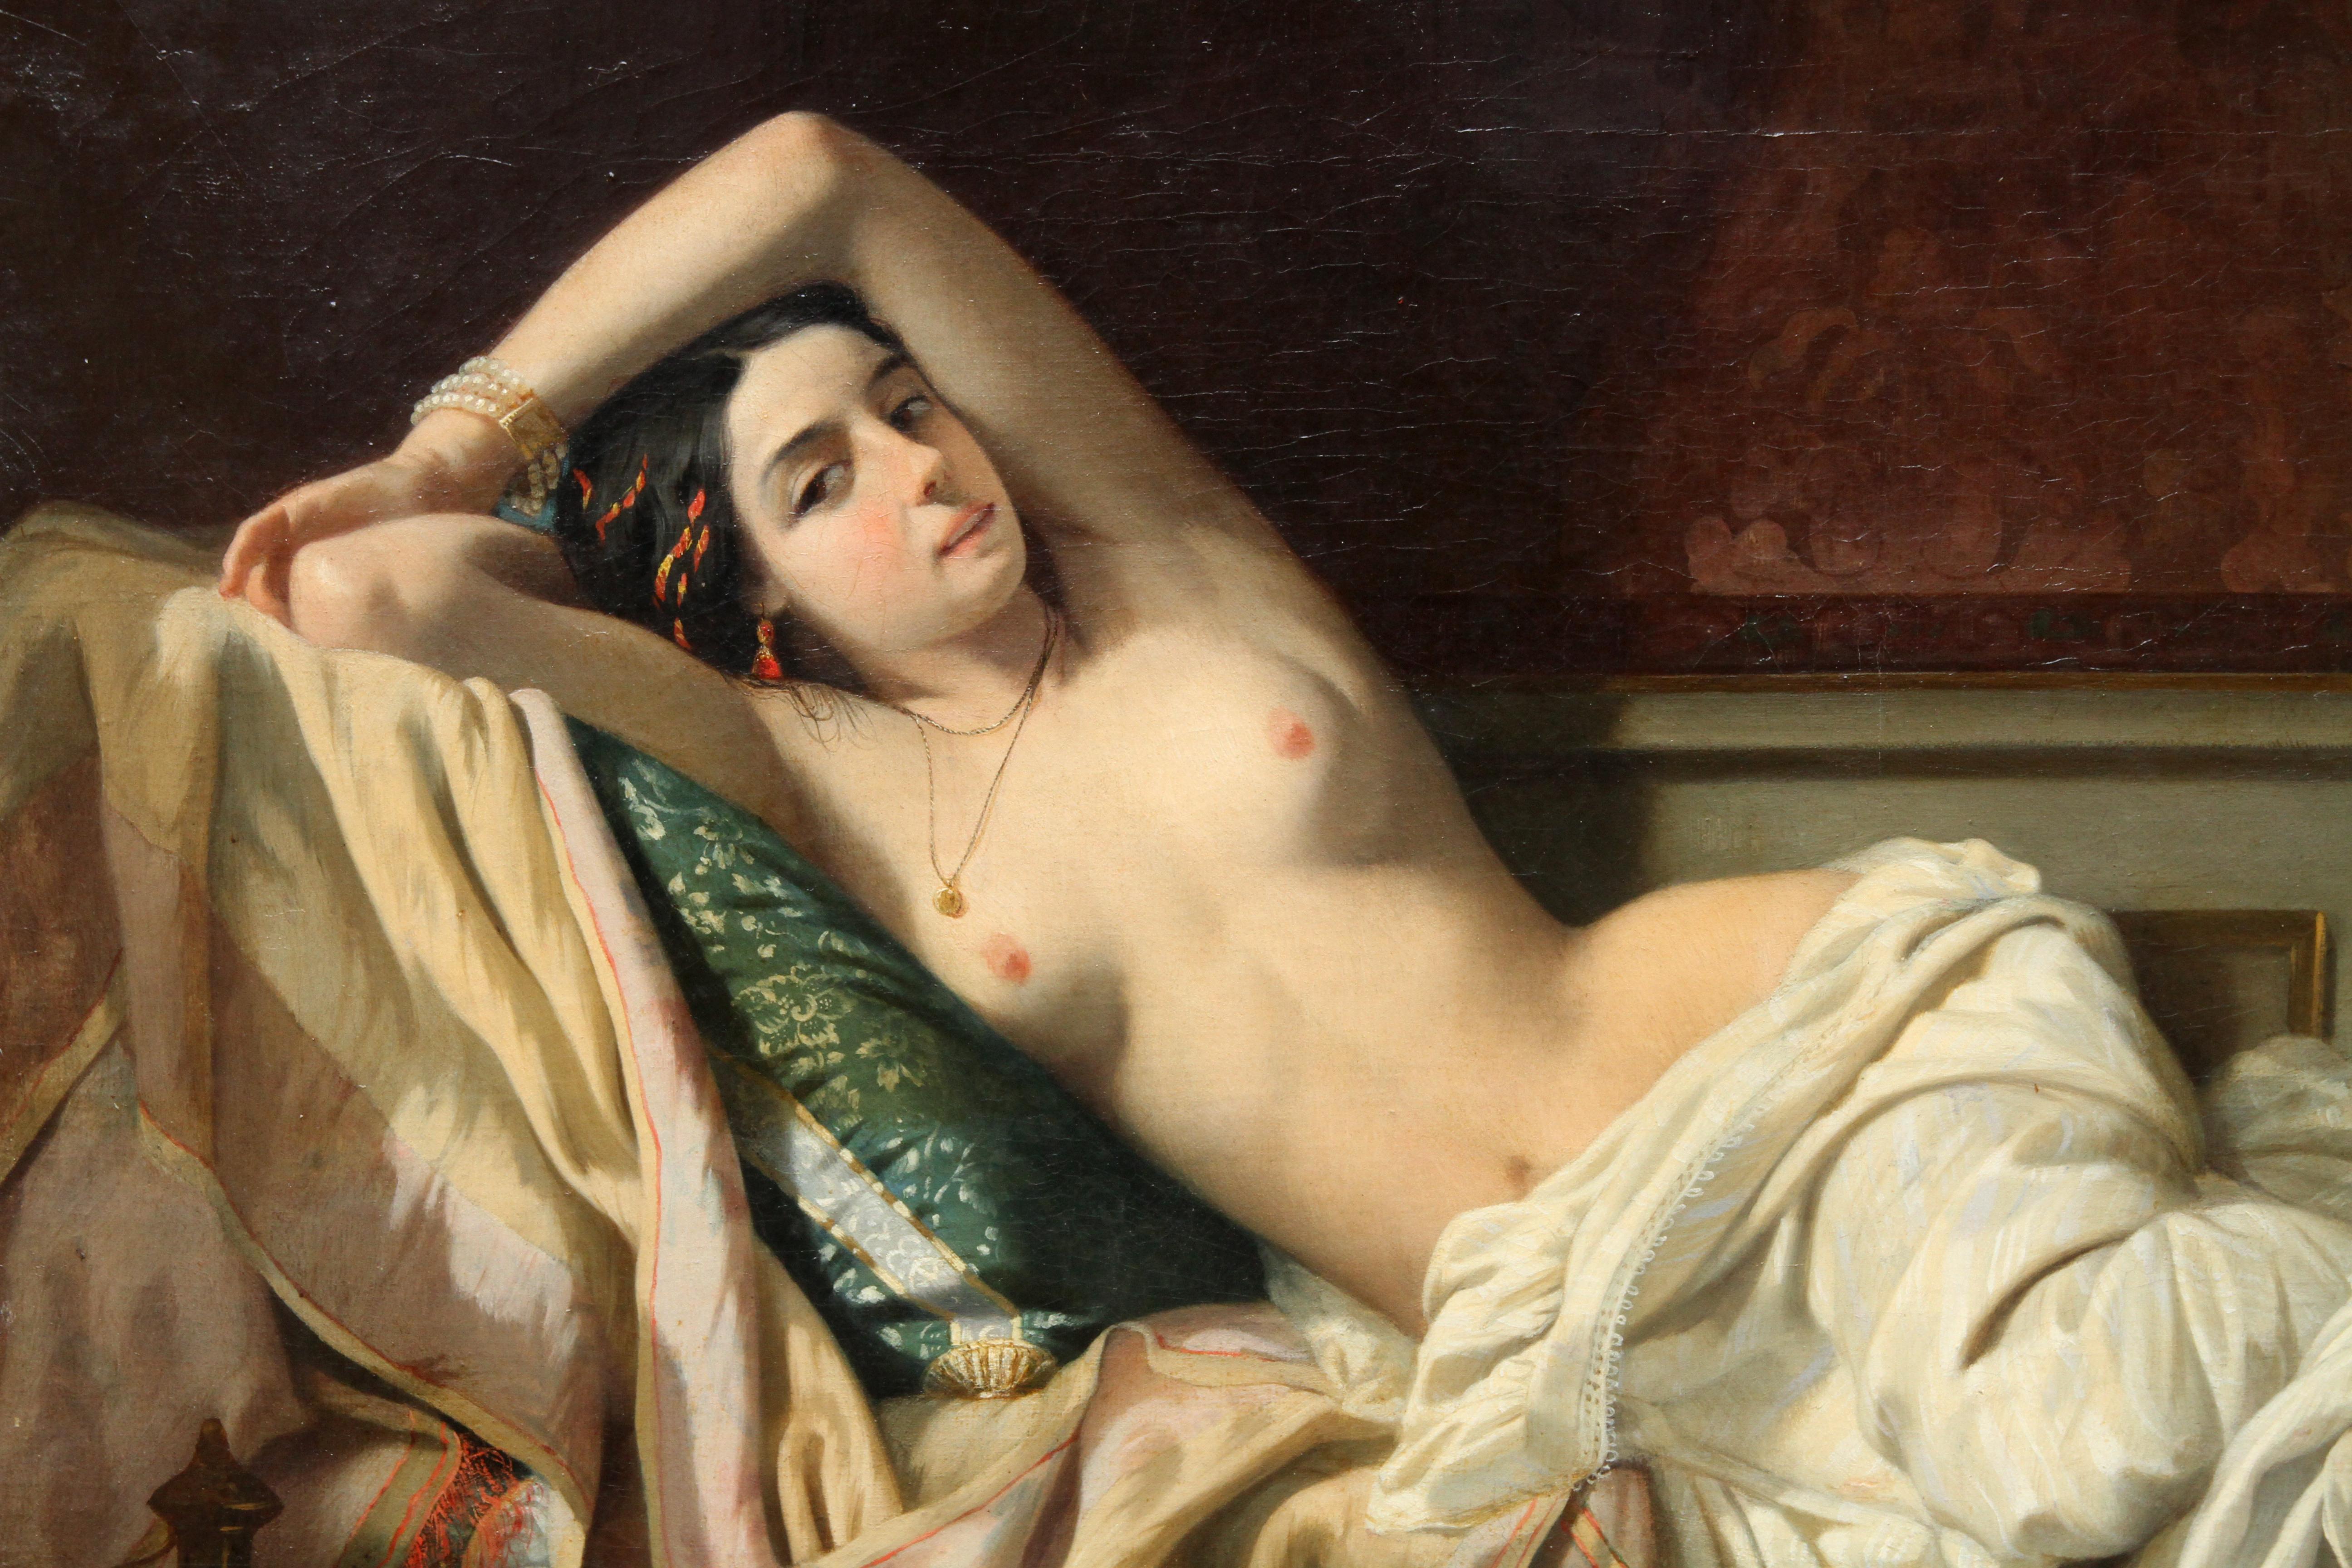 Serenade in the Harem - French 19th Century Orientalist art nude oil painting For Sale 2